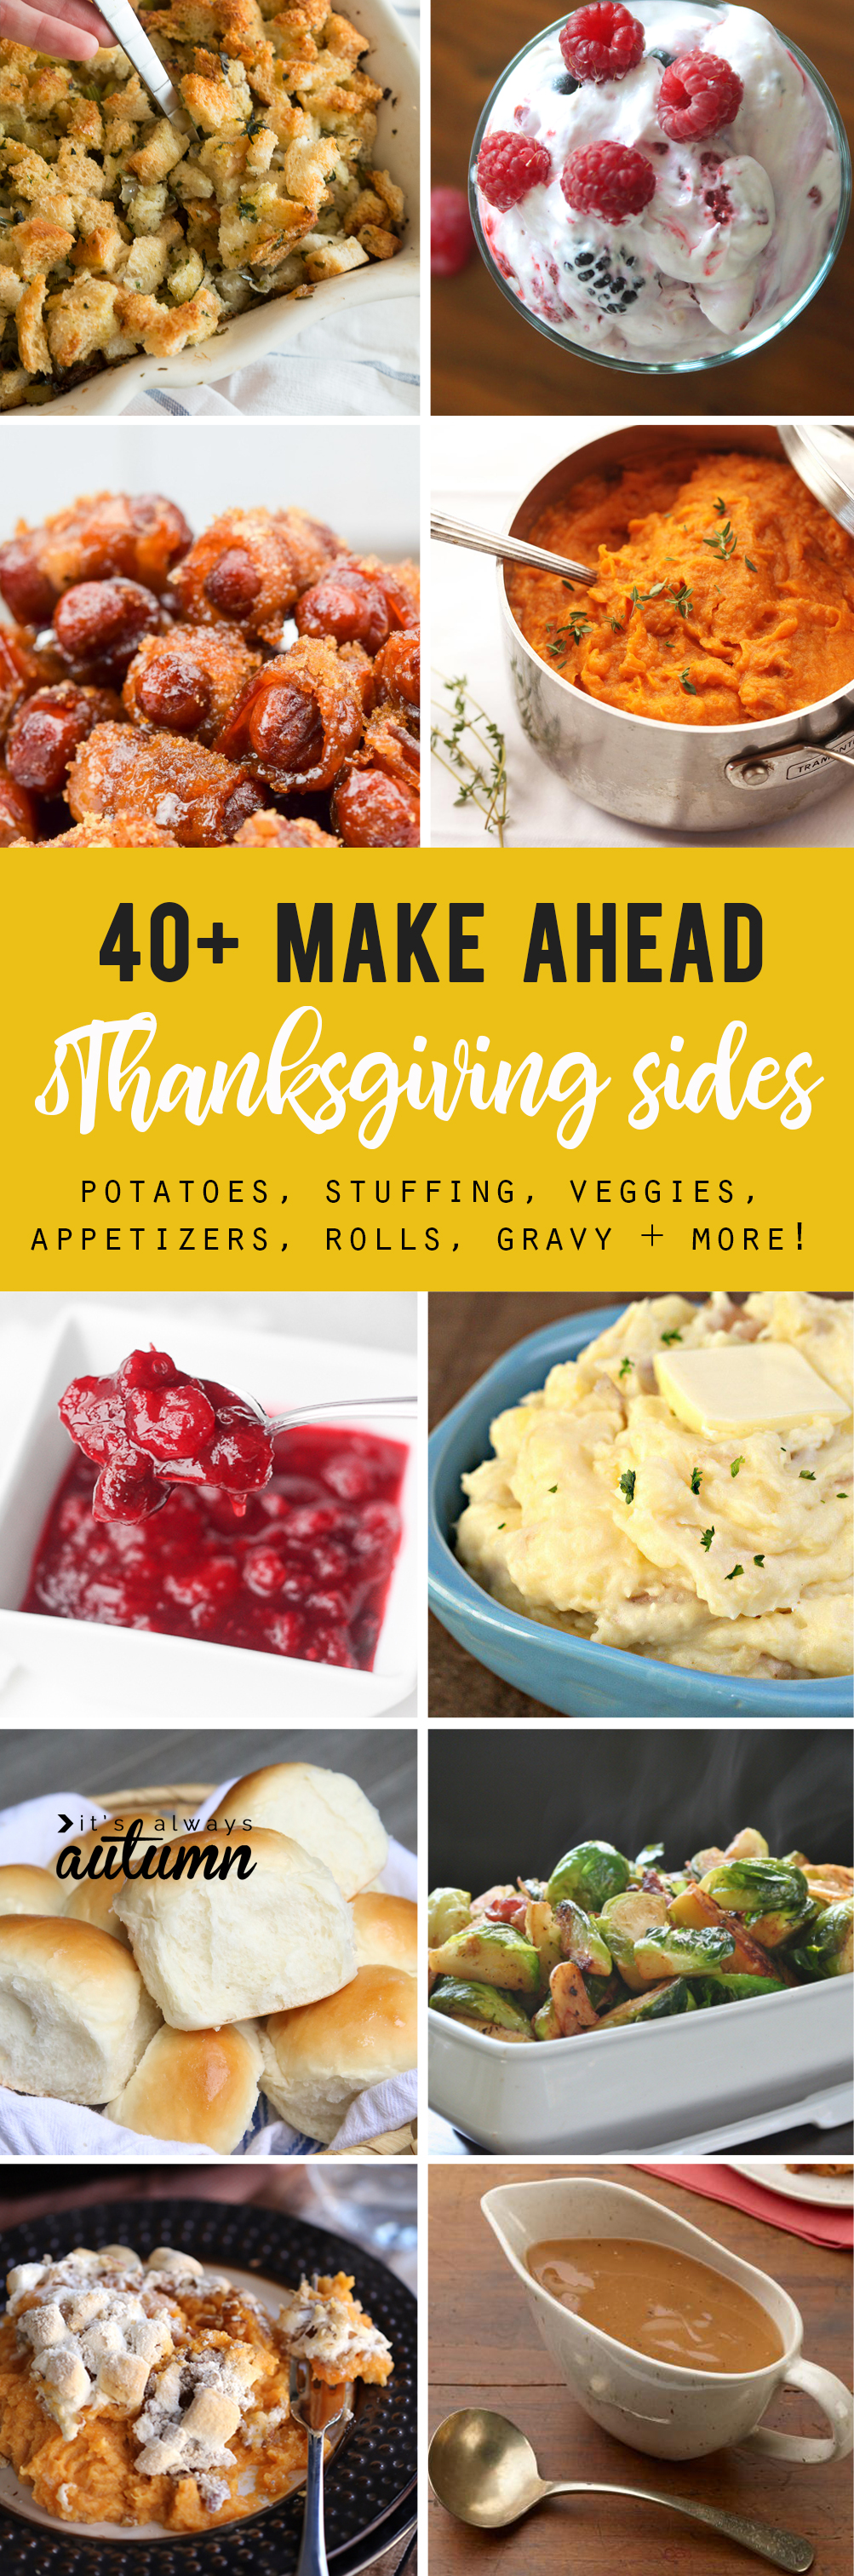 Thanksgiving side dishes you can make ahead: stuffed, potatoes, rolls, veggies, sweet potato casserole and more!